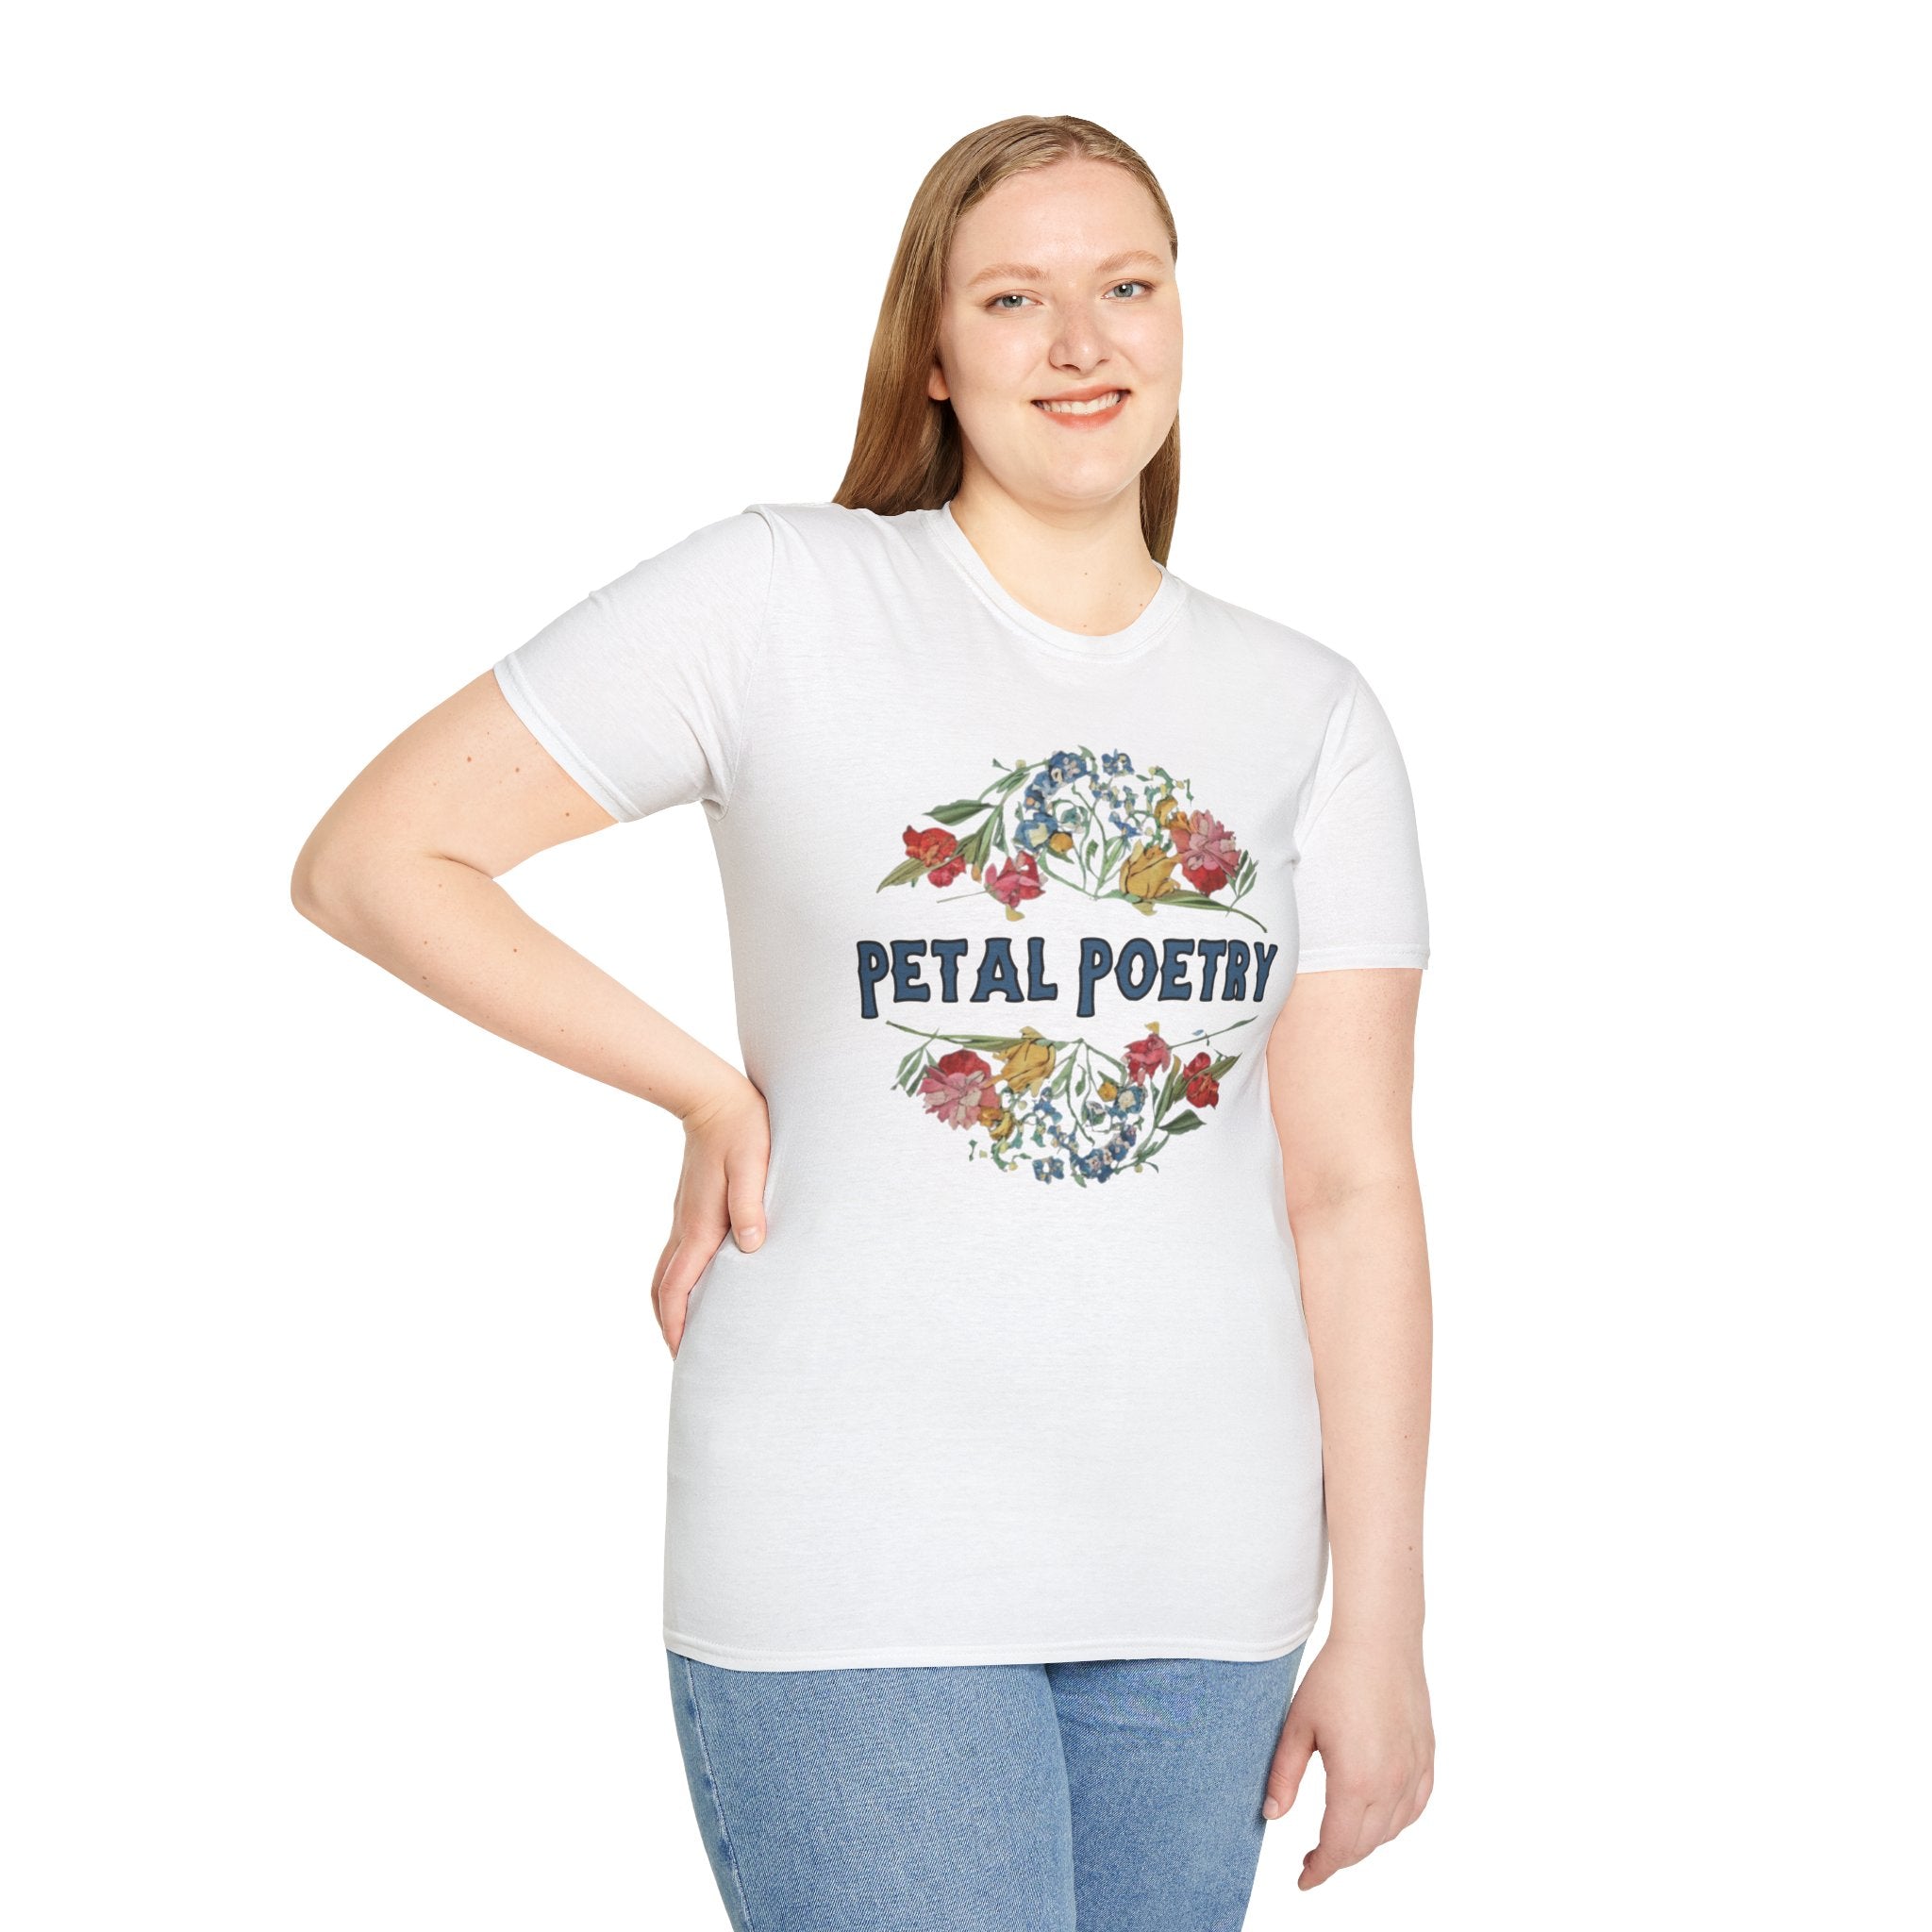 Petal Poetry Unisex Softstyle T-Shirt - S-3XL